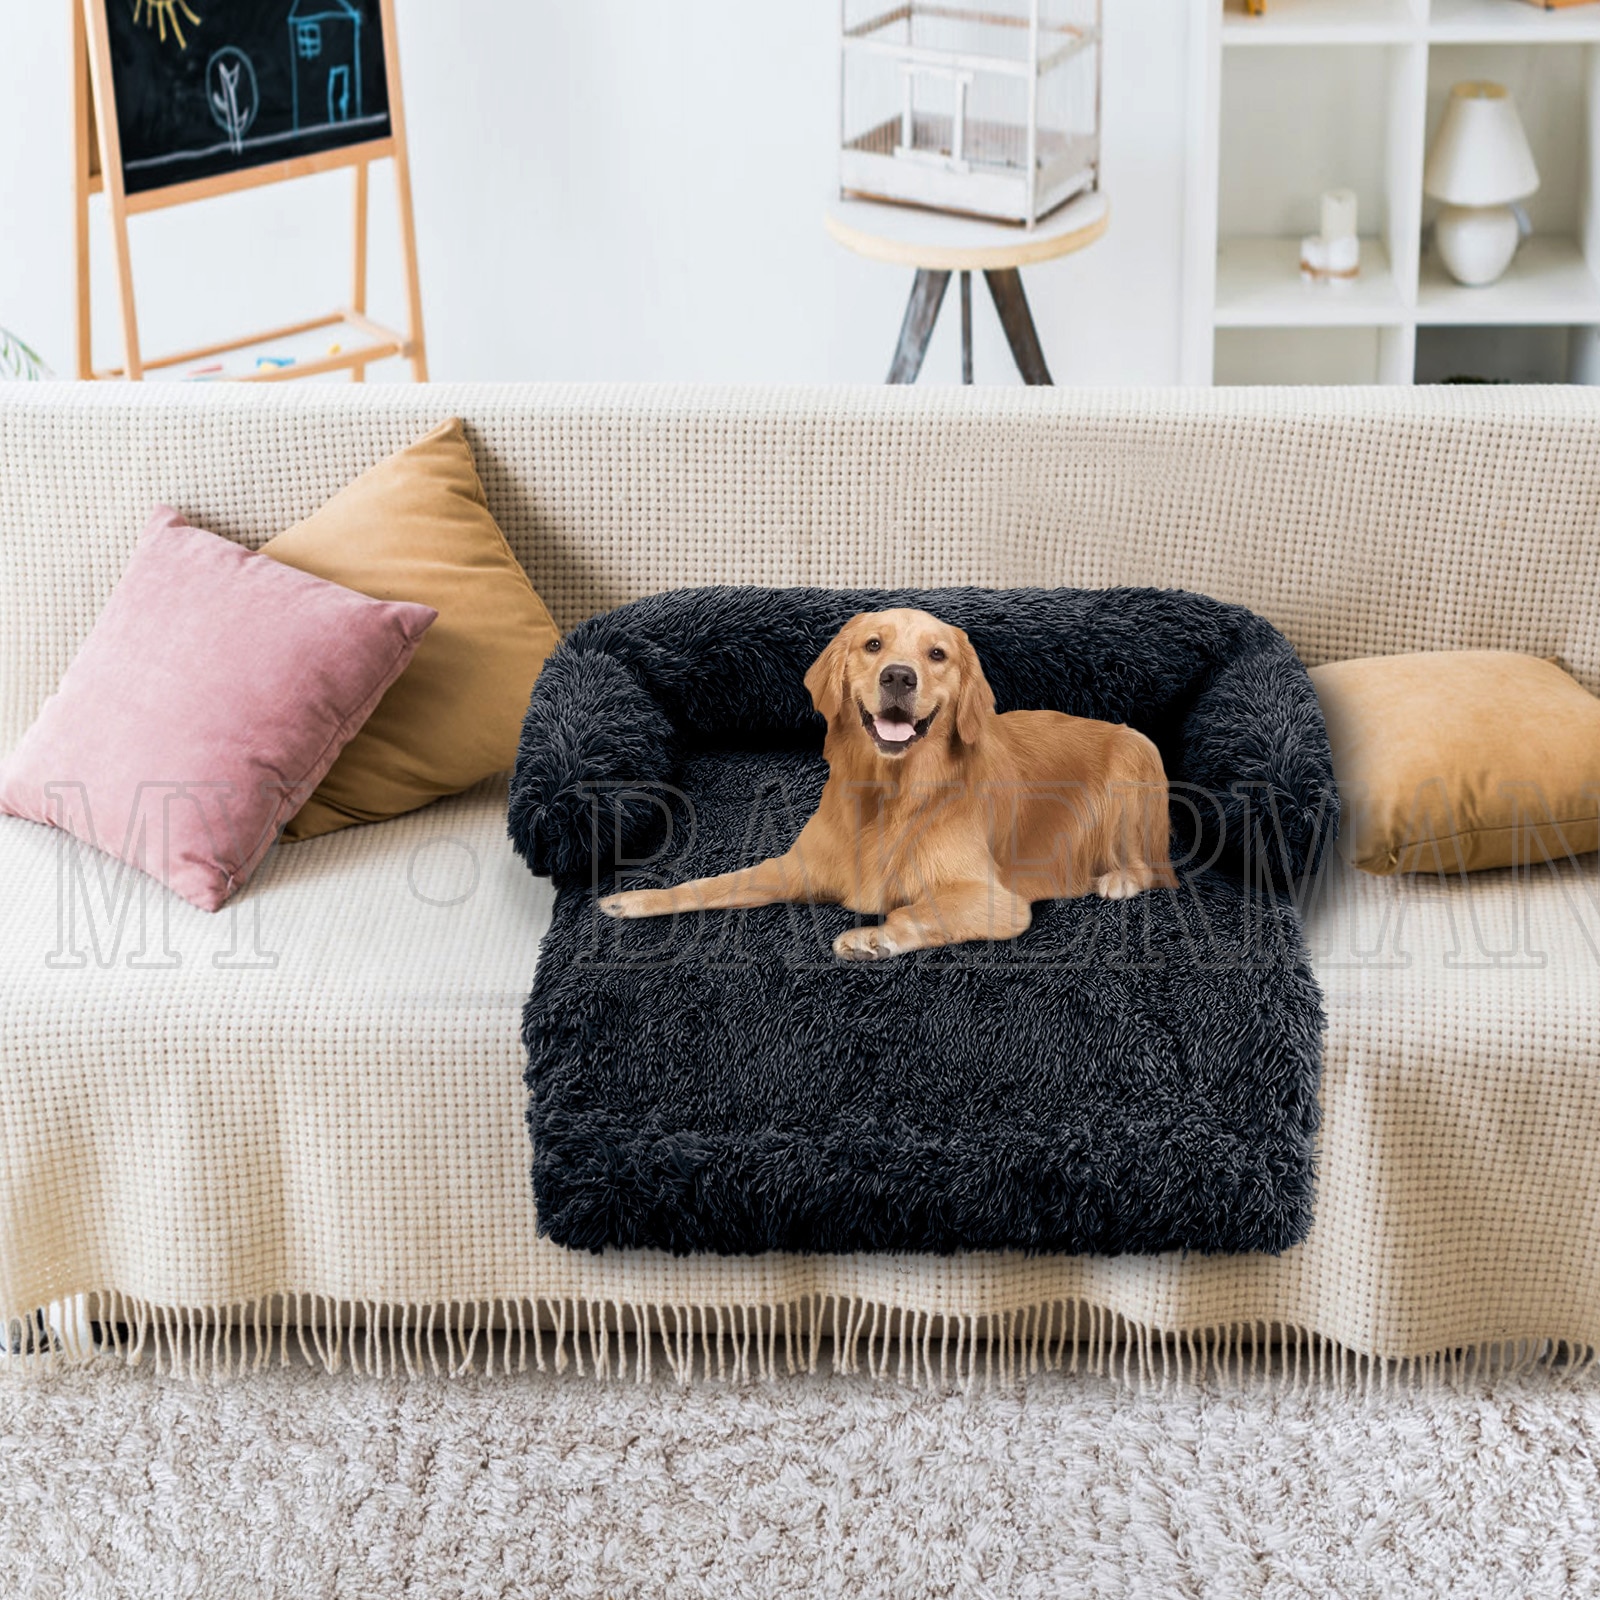 1413925217 1 - Large Plush Dog Sofa Bed Couch Protector - thepamperedpooch-co, pet-beds, dog-beds